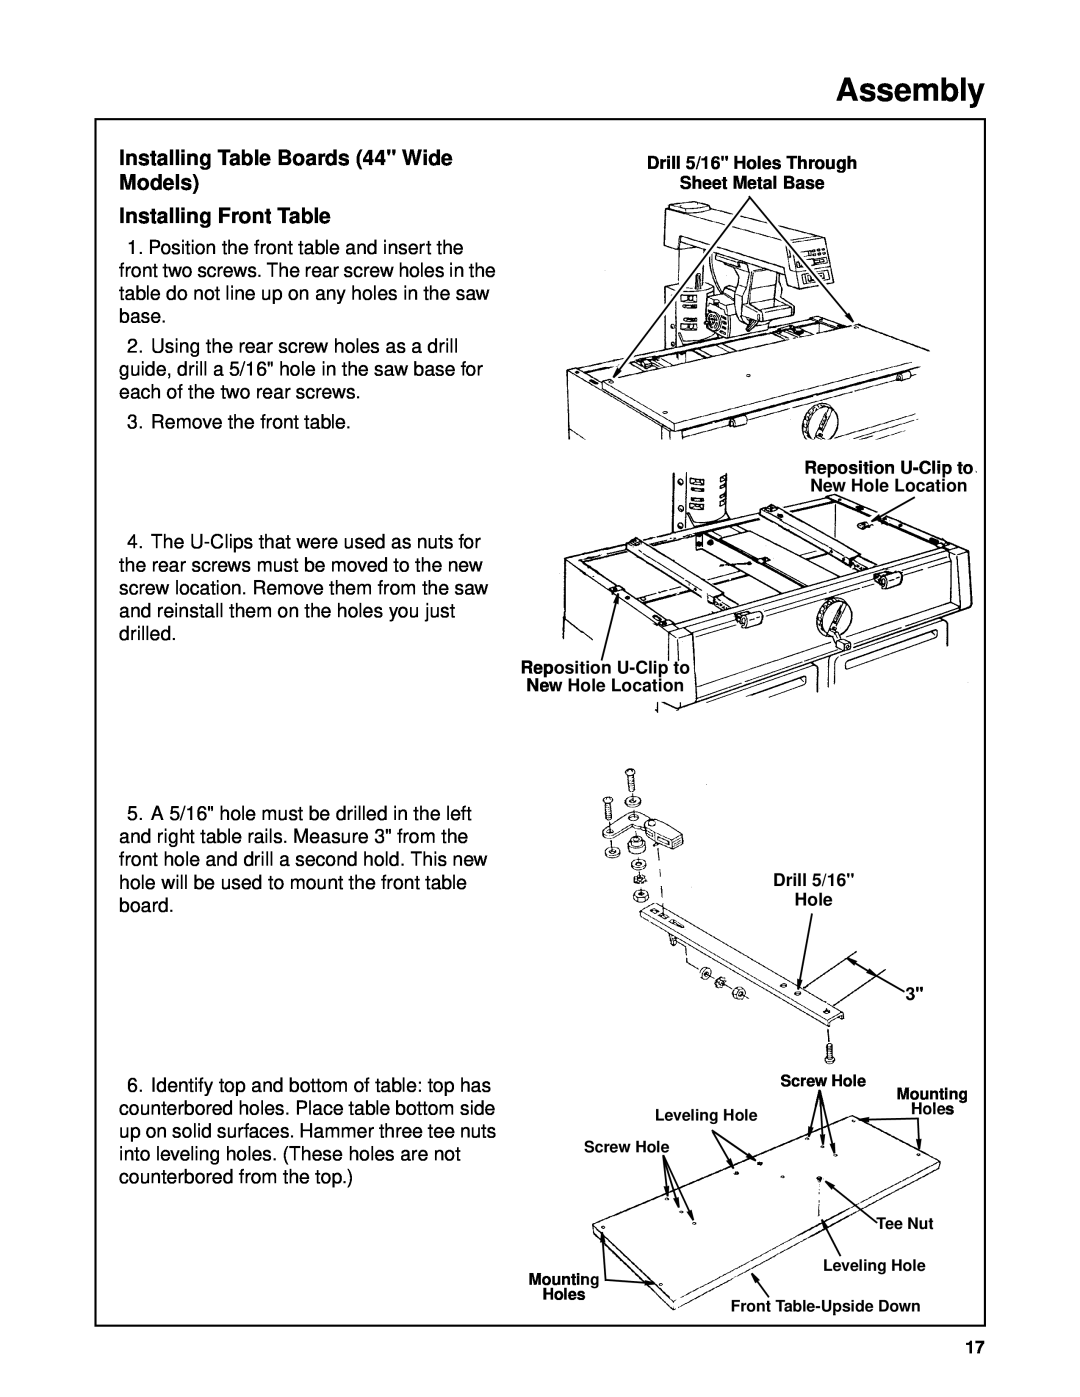 Craftsman 509398, 509399 owner manual Installing Table Boards 44 Wide Models Installing Front Table, Assembly 